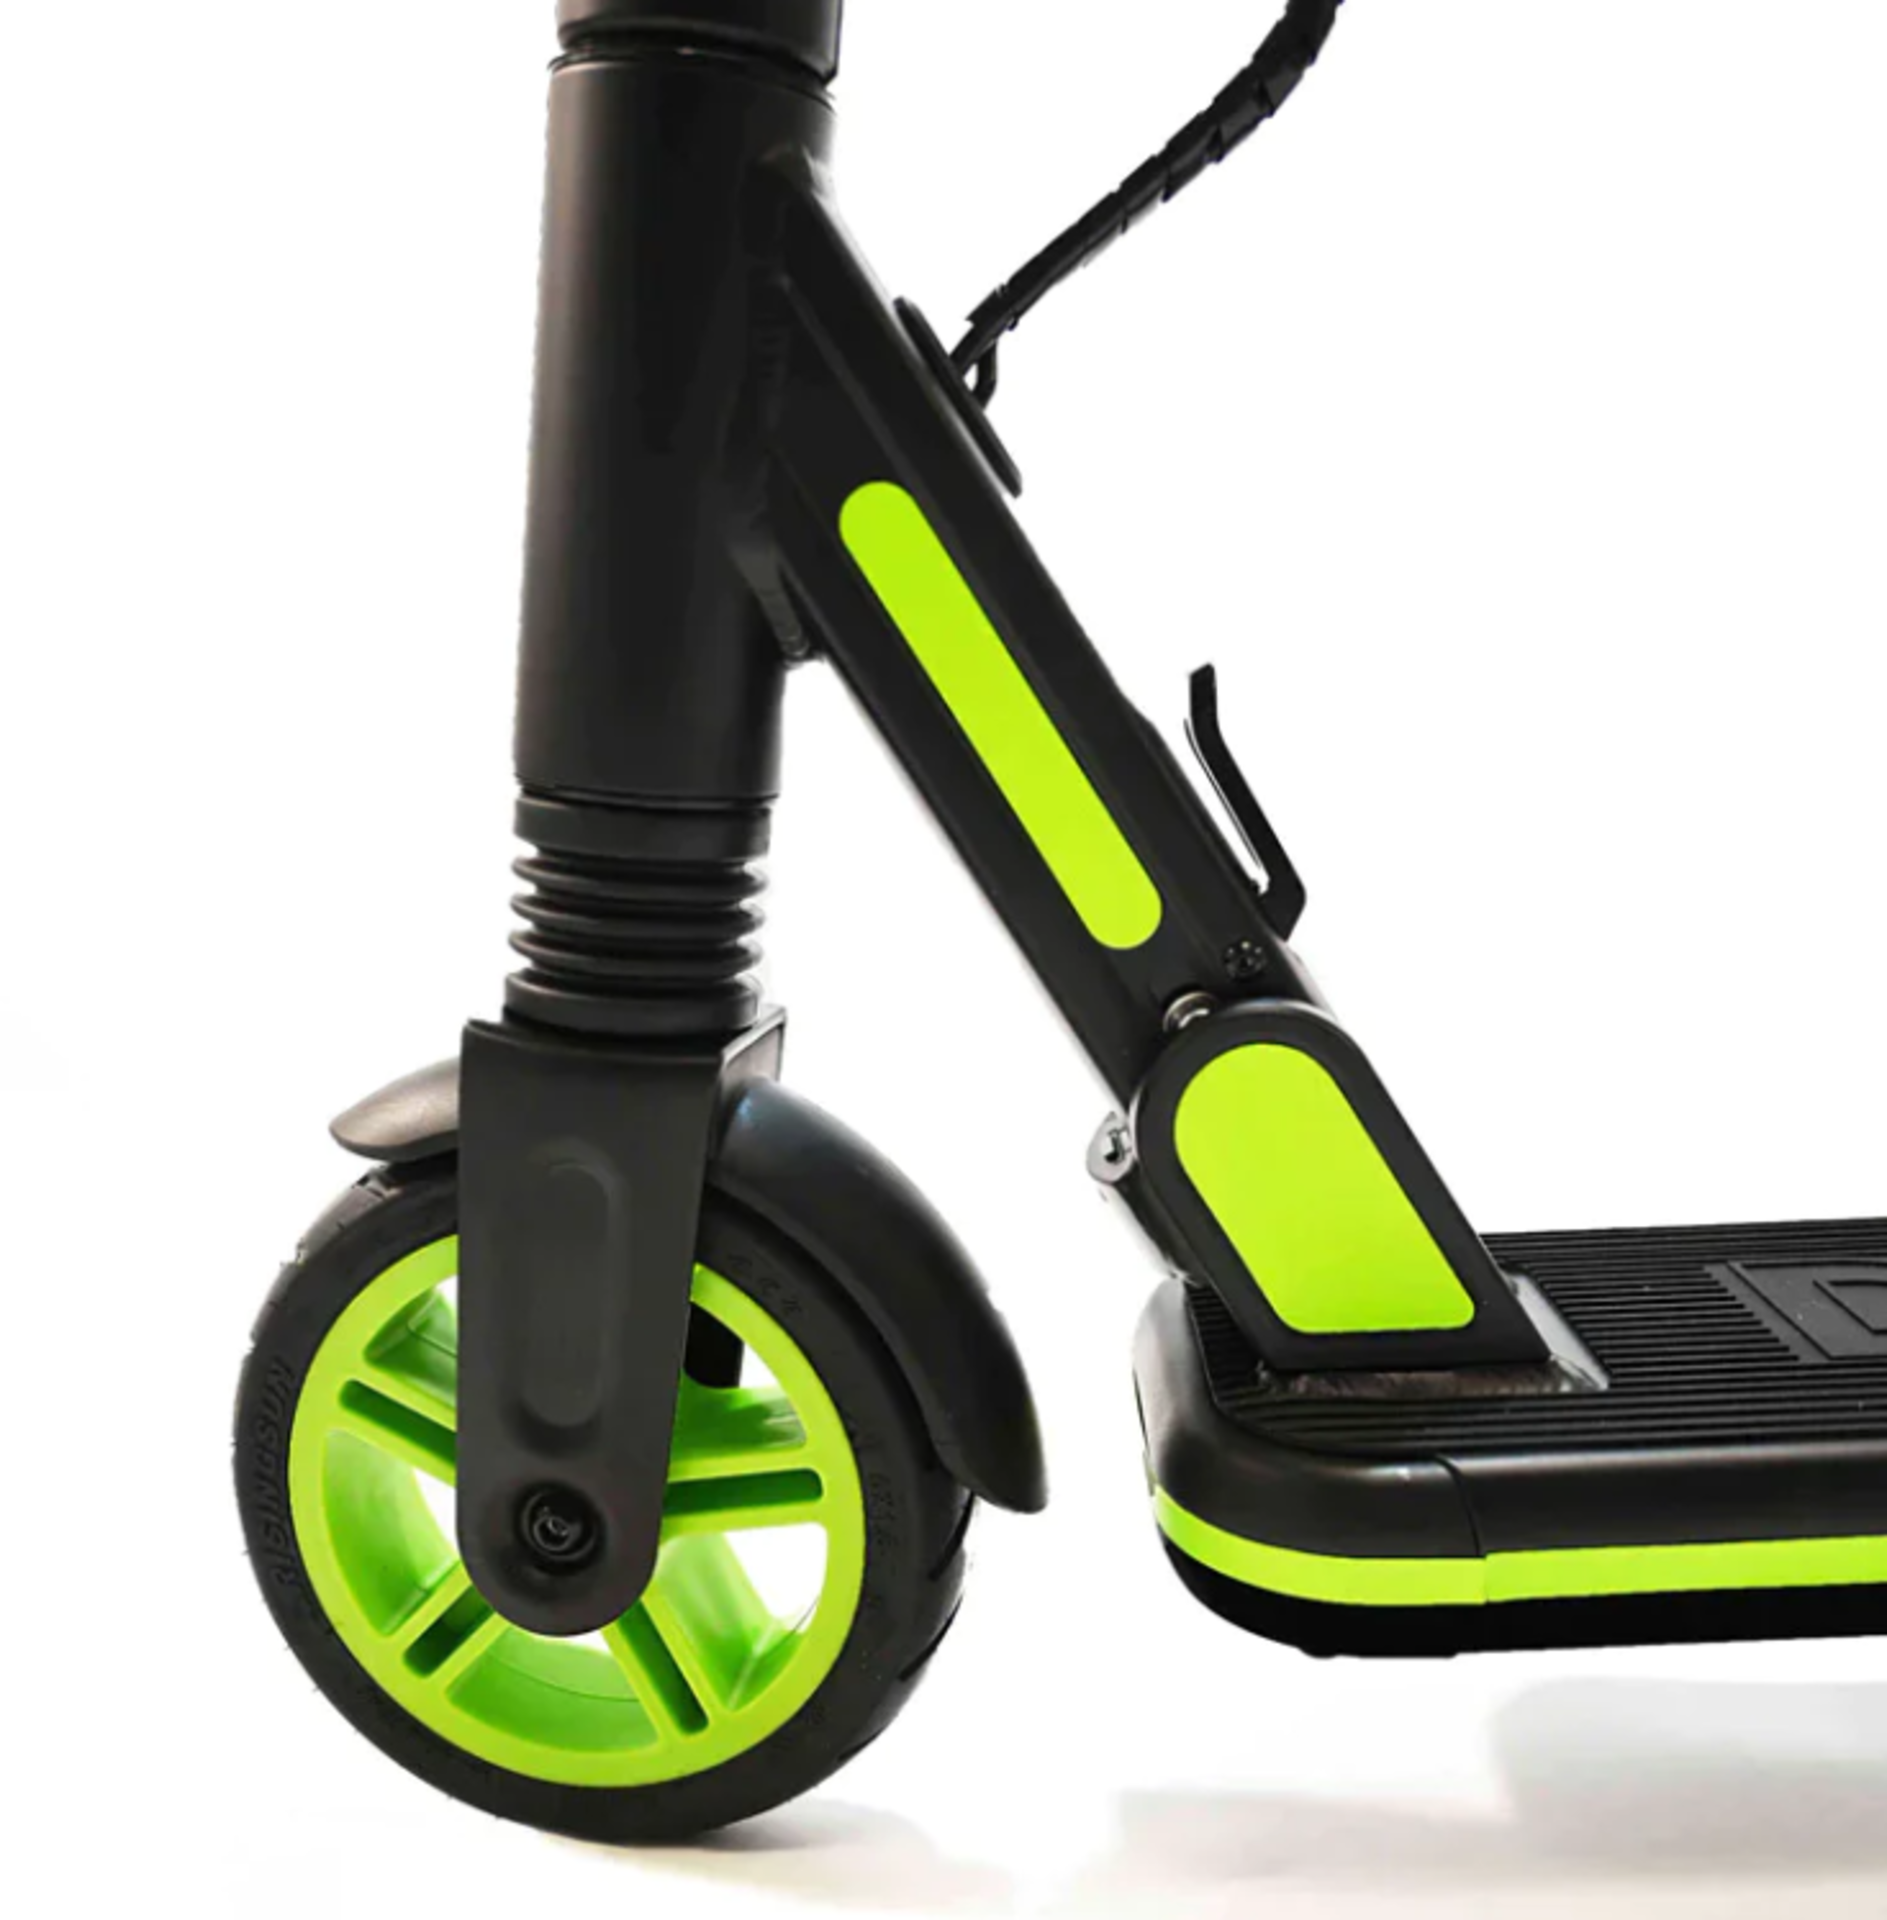 New &Boxed DECENT Kids Electric Scooter - Blue/Green. Let your kids zip around in style. With this - Image 3 of 3